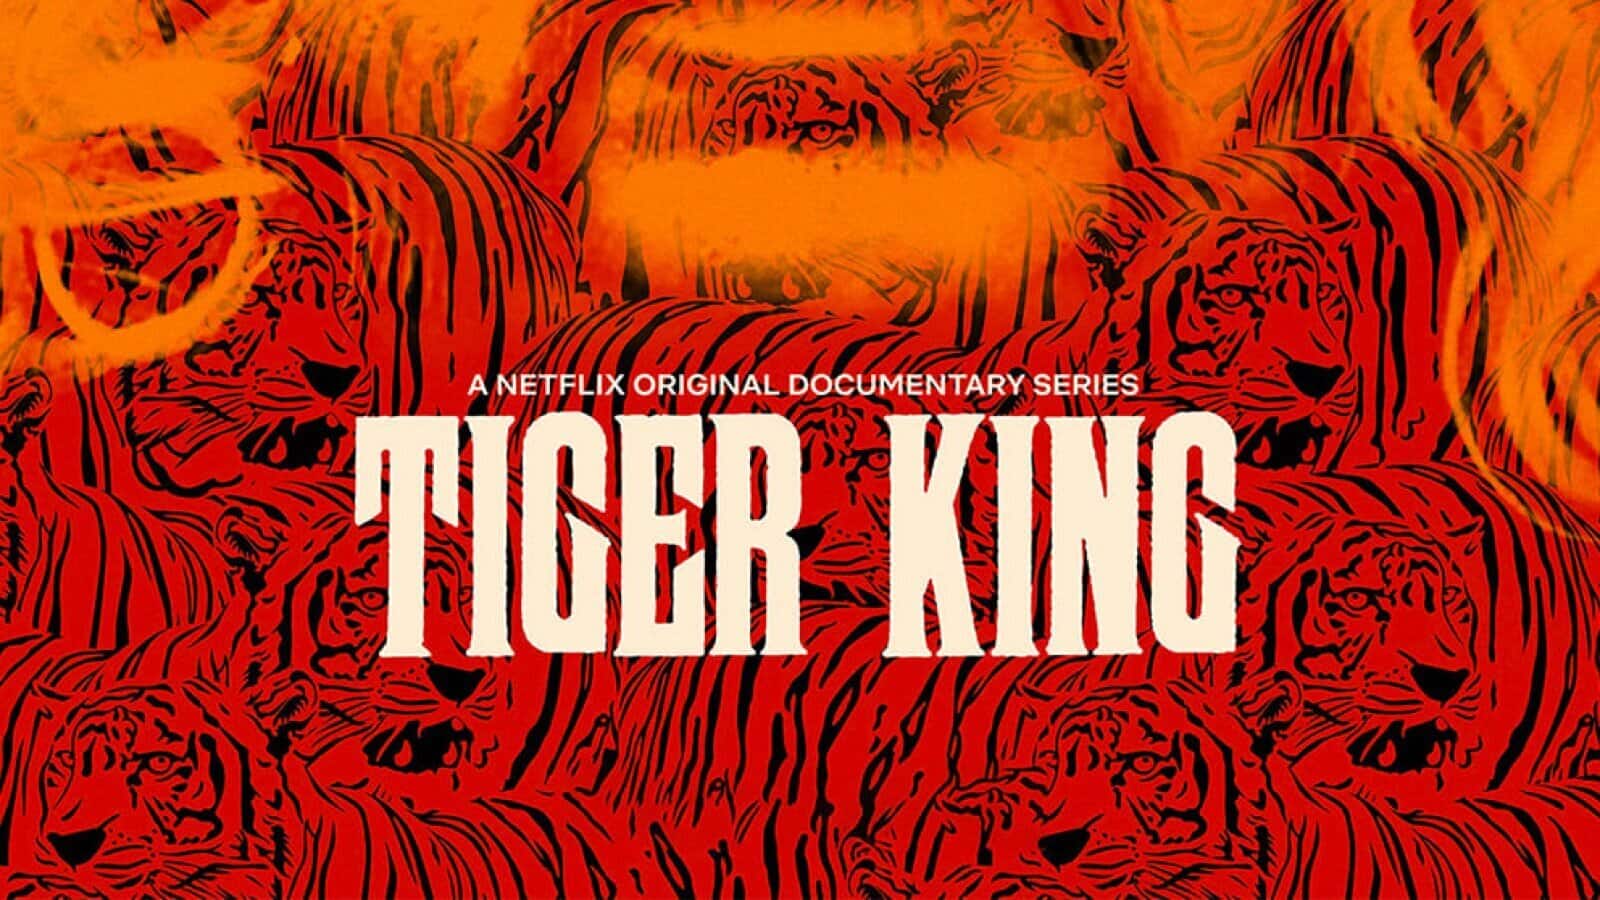 'Tiger King' quotes: You'll be saying these lines nonstop for days ...